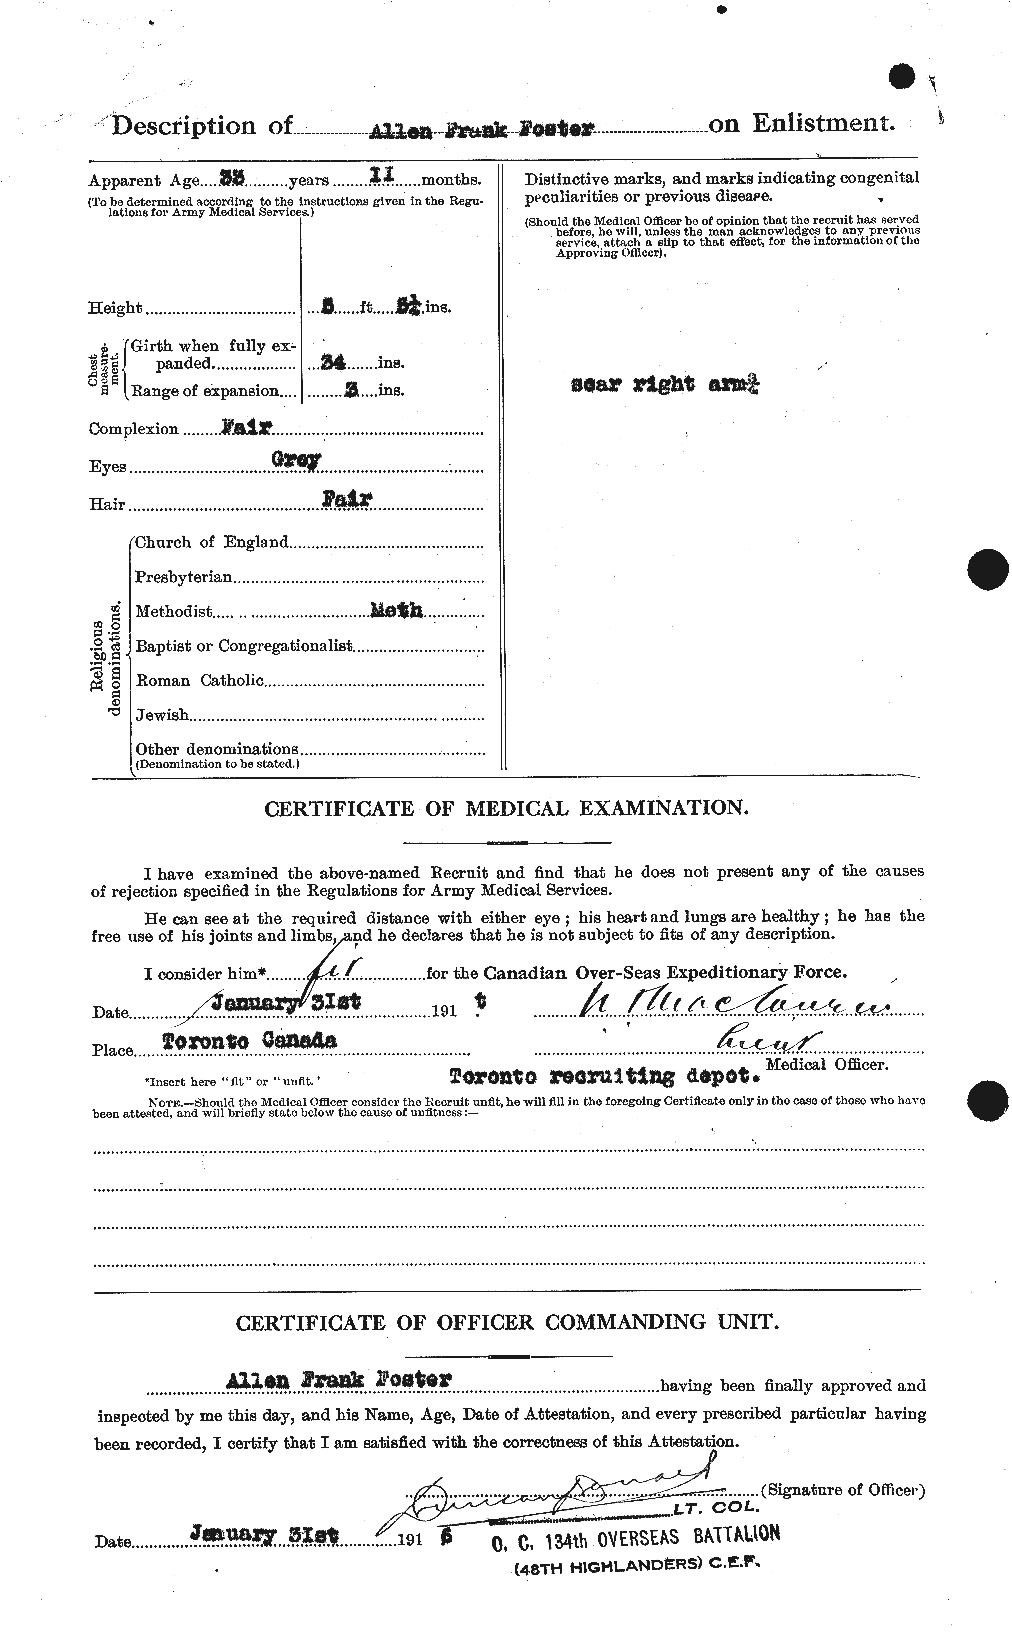 Personnel Records of the First World War - CEF 330452b